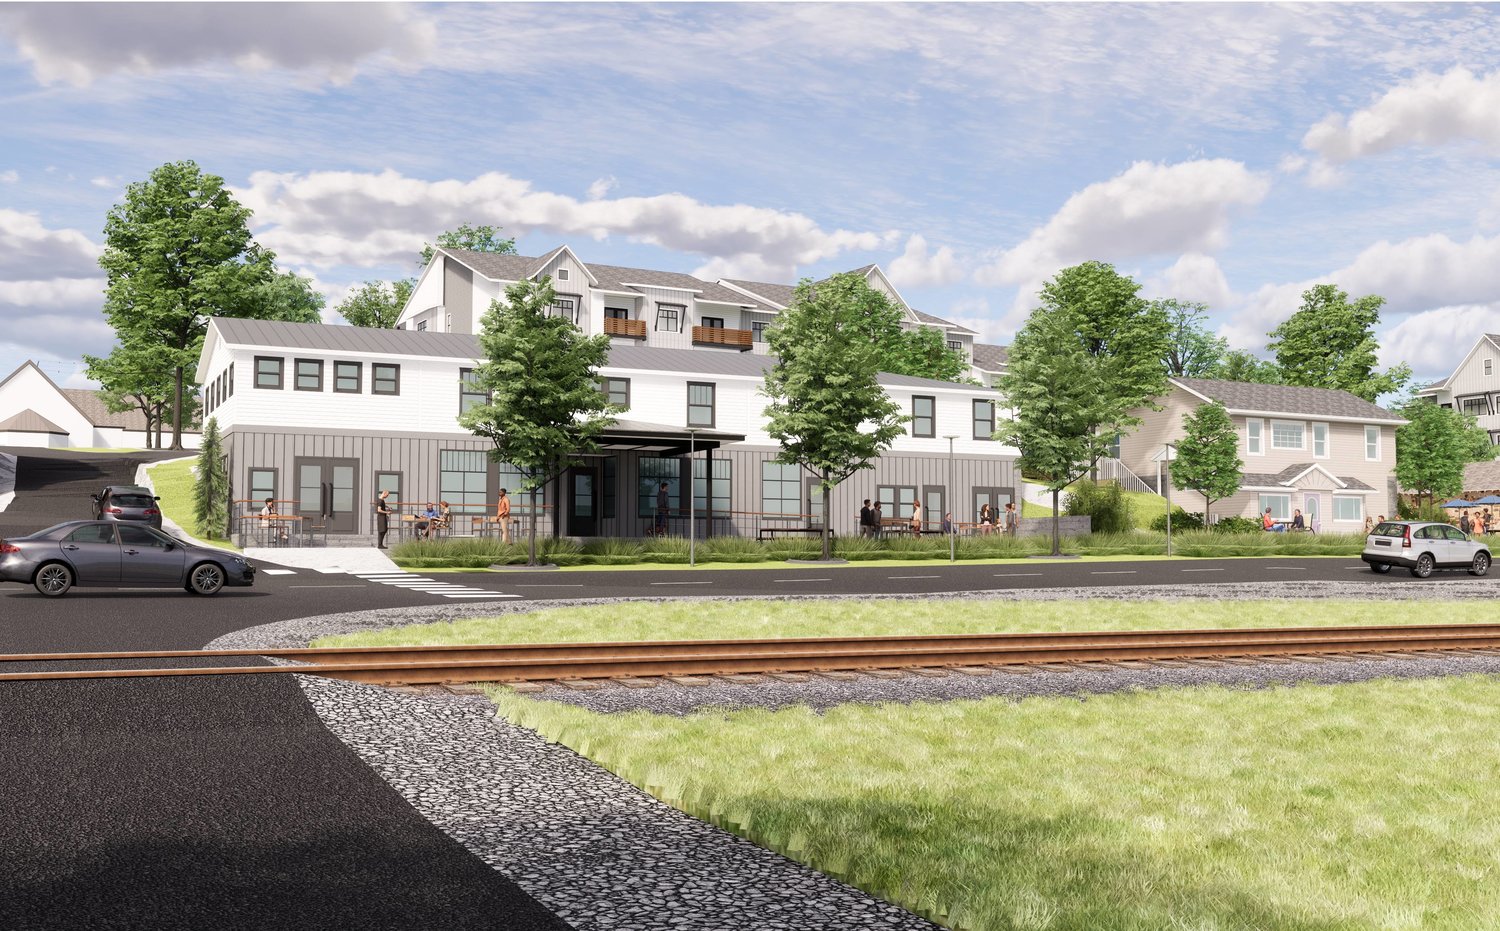 The development company behind Treadway, a mixed-use project in Galloway Village, has the all clear from City Council.